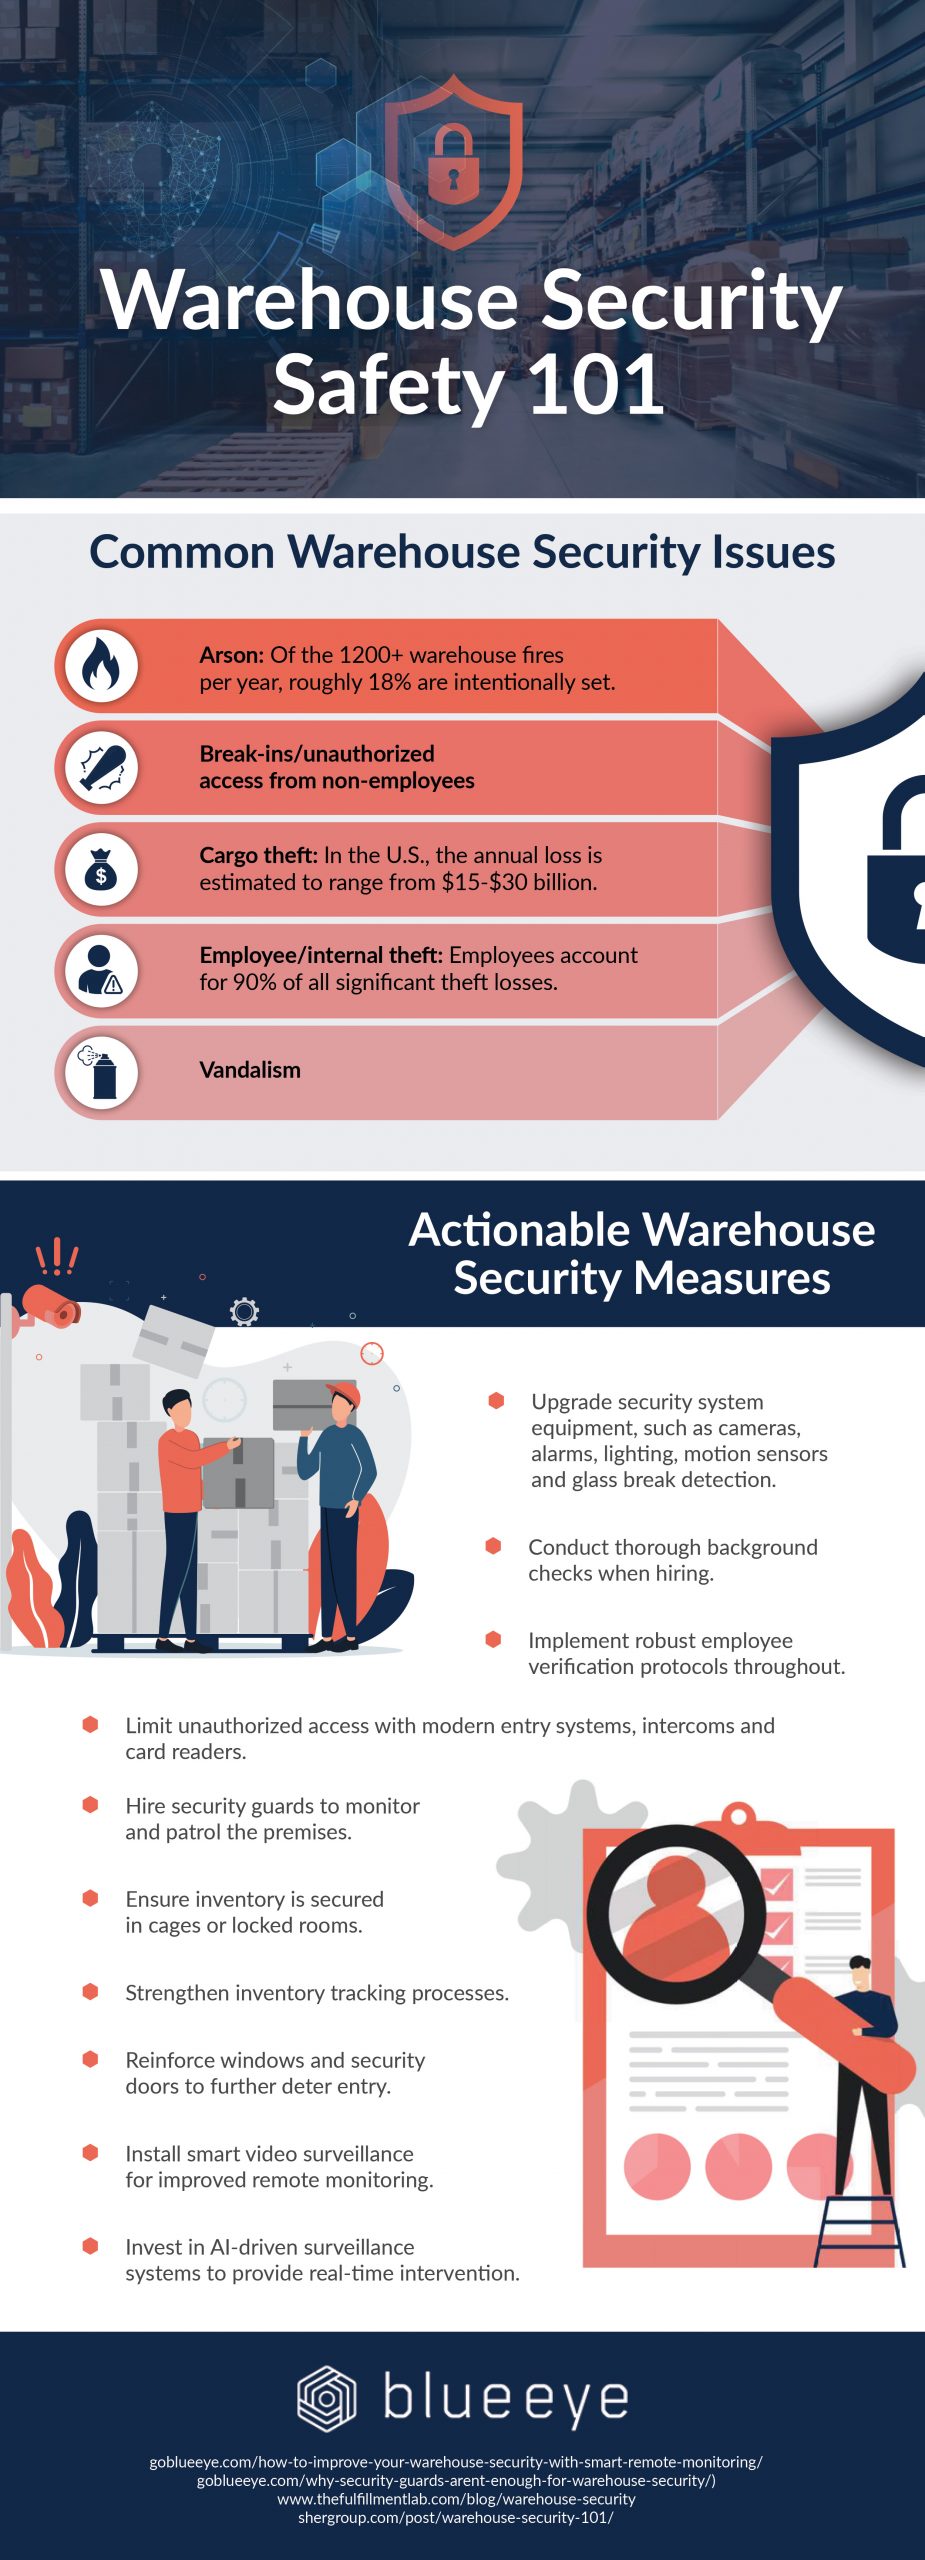 blueeye infographic warehouse security issues